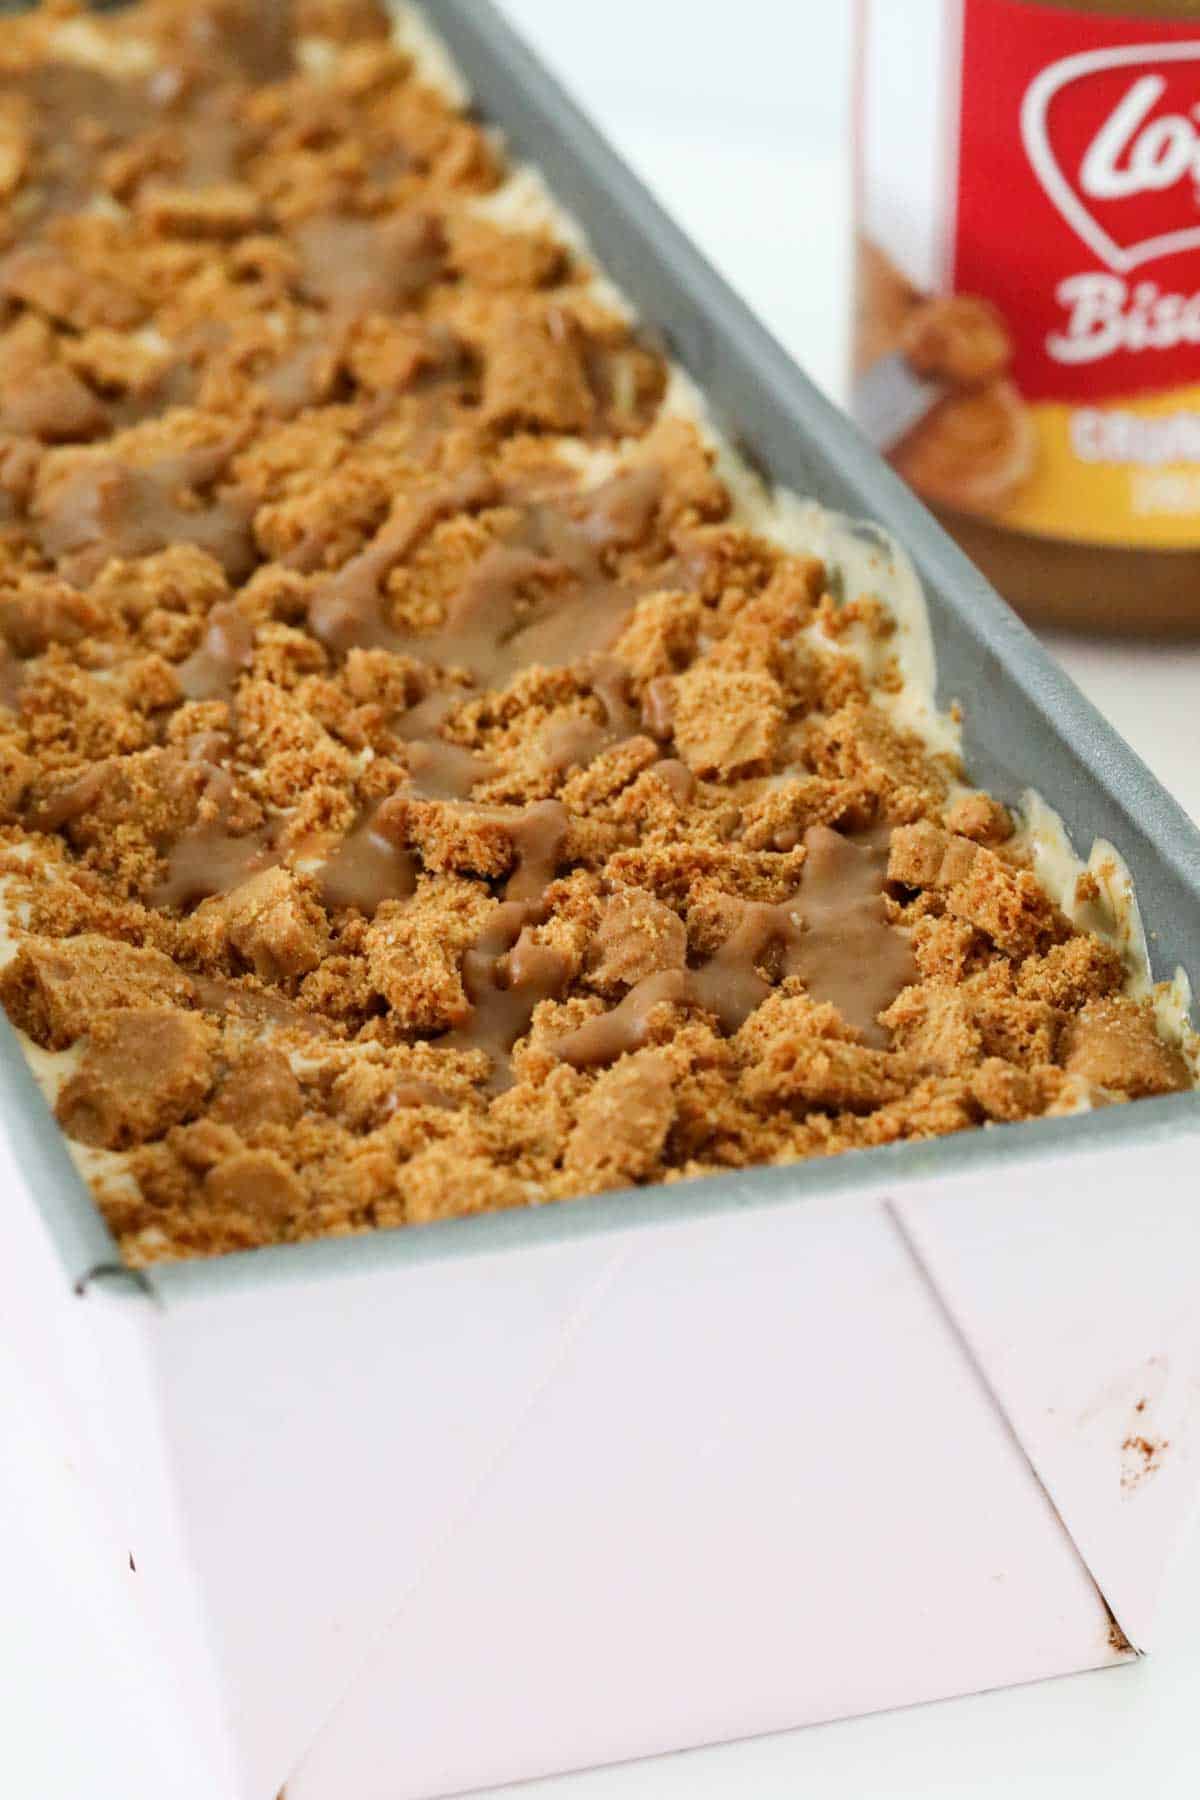 Crumbled biscuits and Biscoff spread over the top of ice cream in a loaf tin.